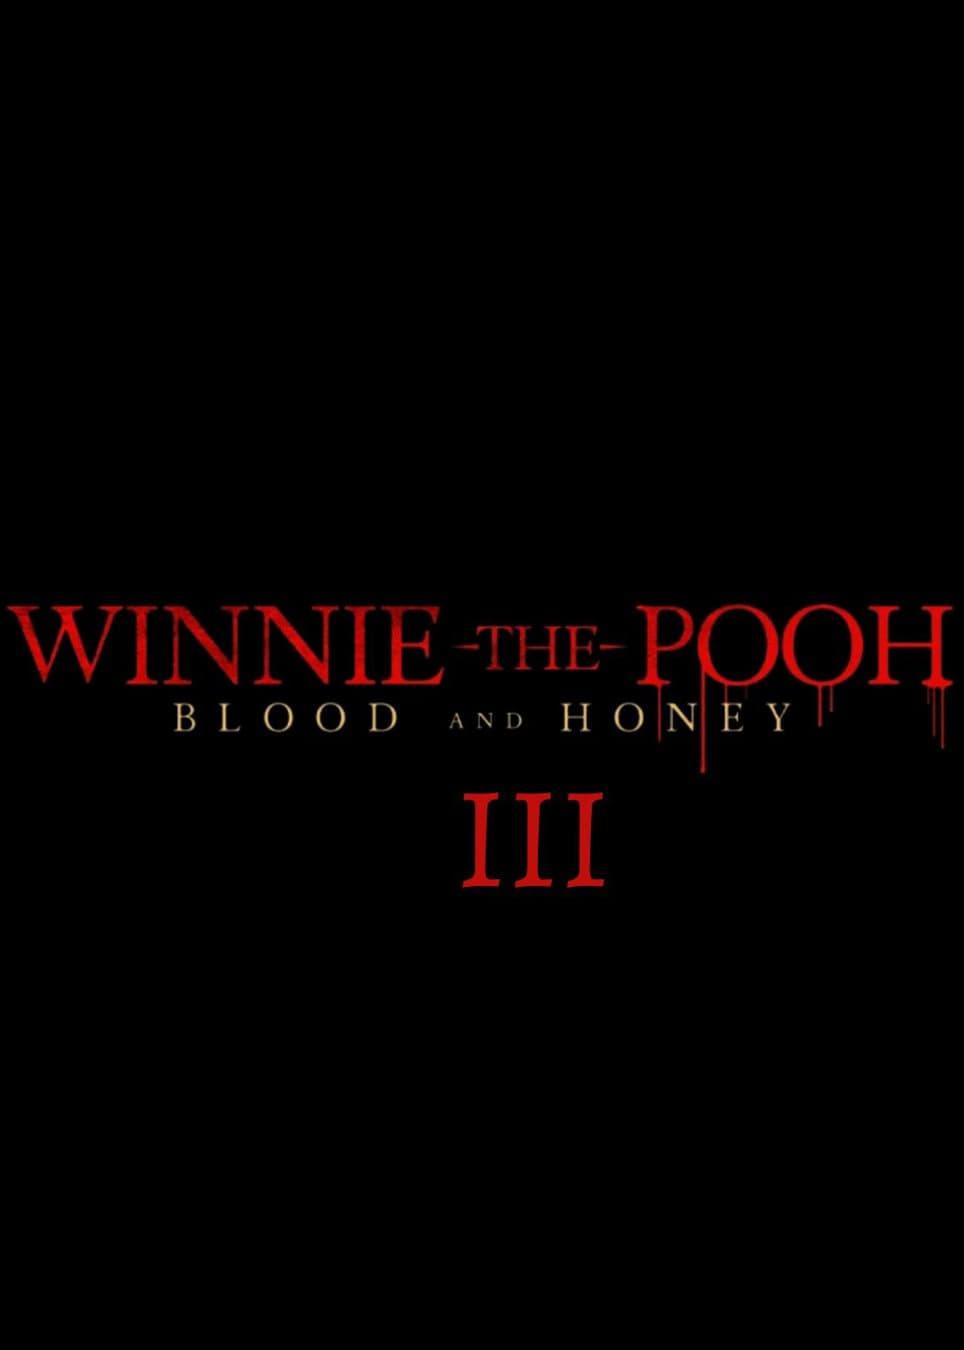 Winnie-the-Pooh: Blood and Honey 4 poster